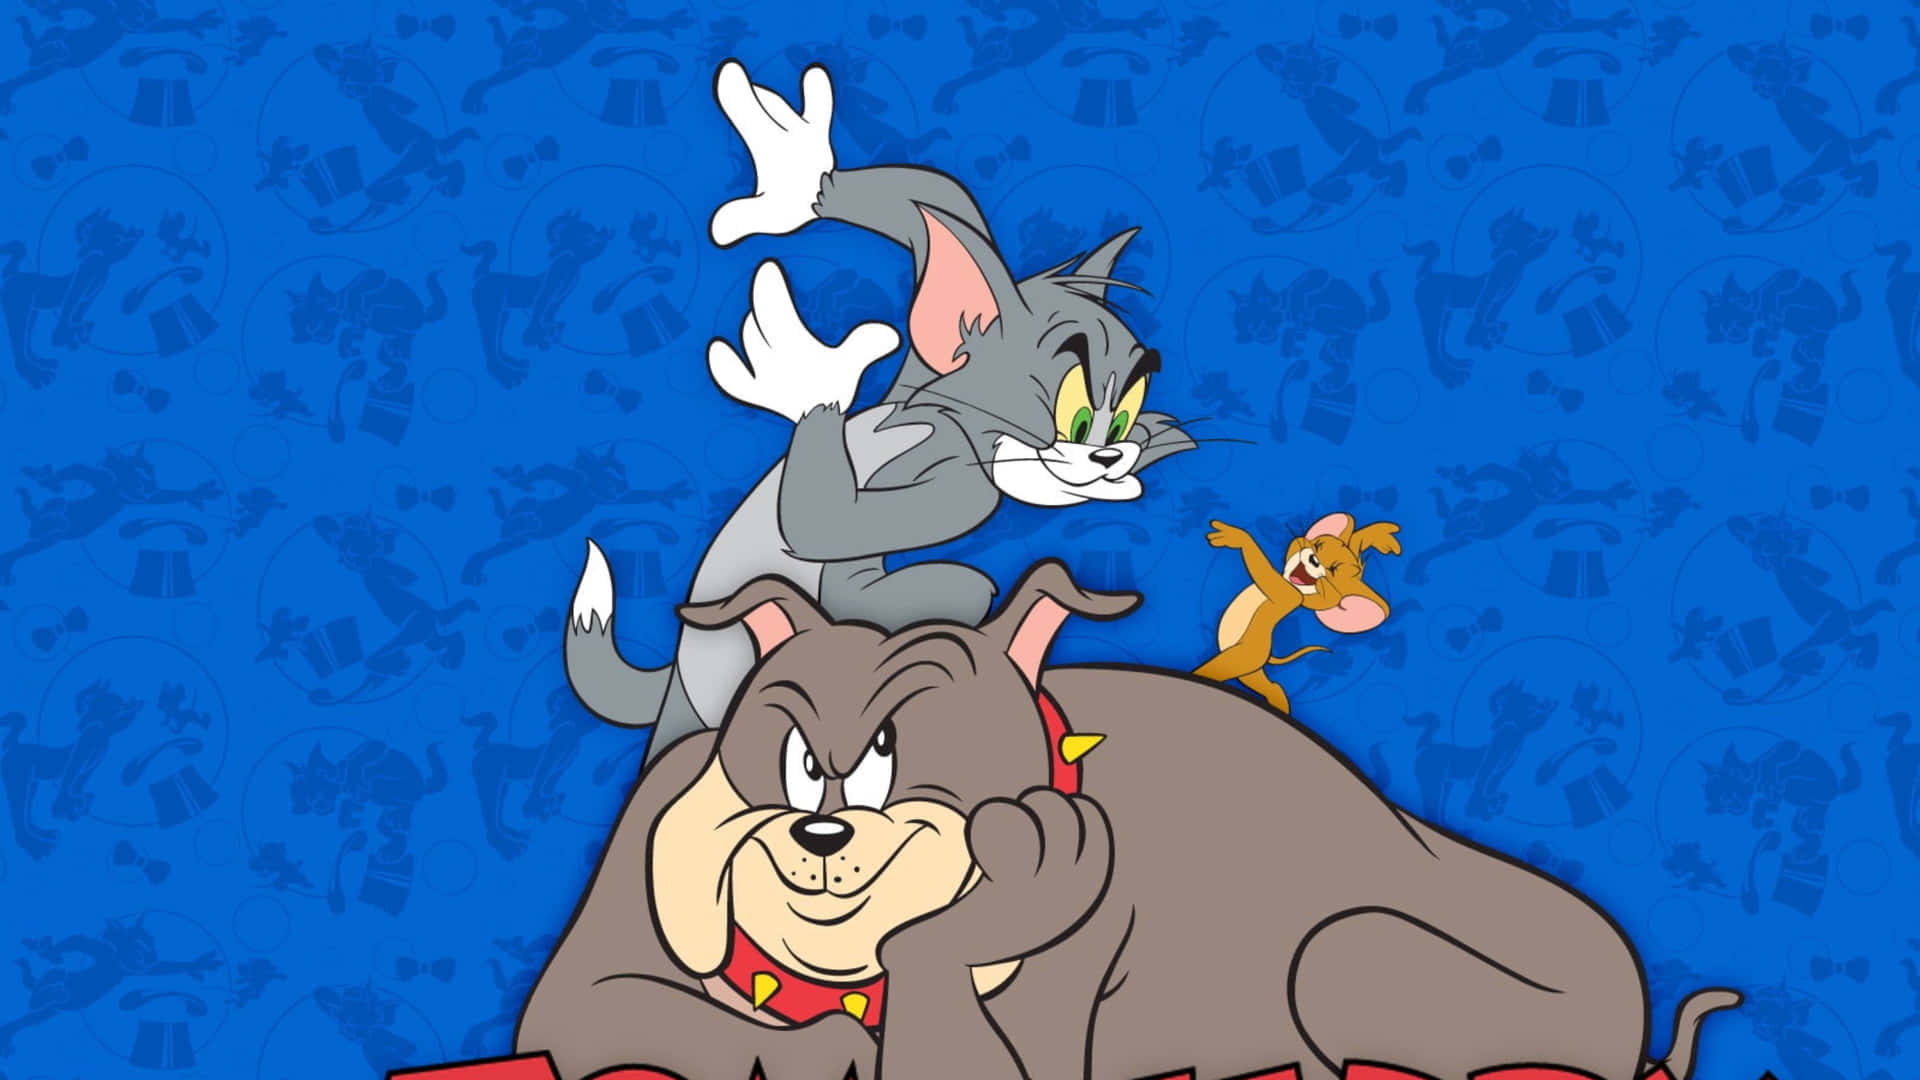 Tom and Jerry up to their usual antics in this hilarious scene. Wallpaper